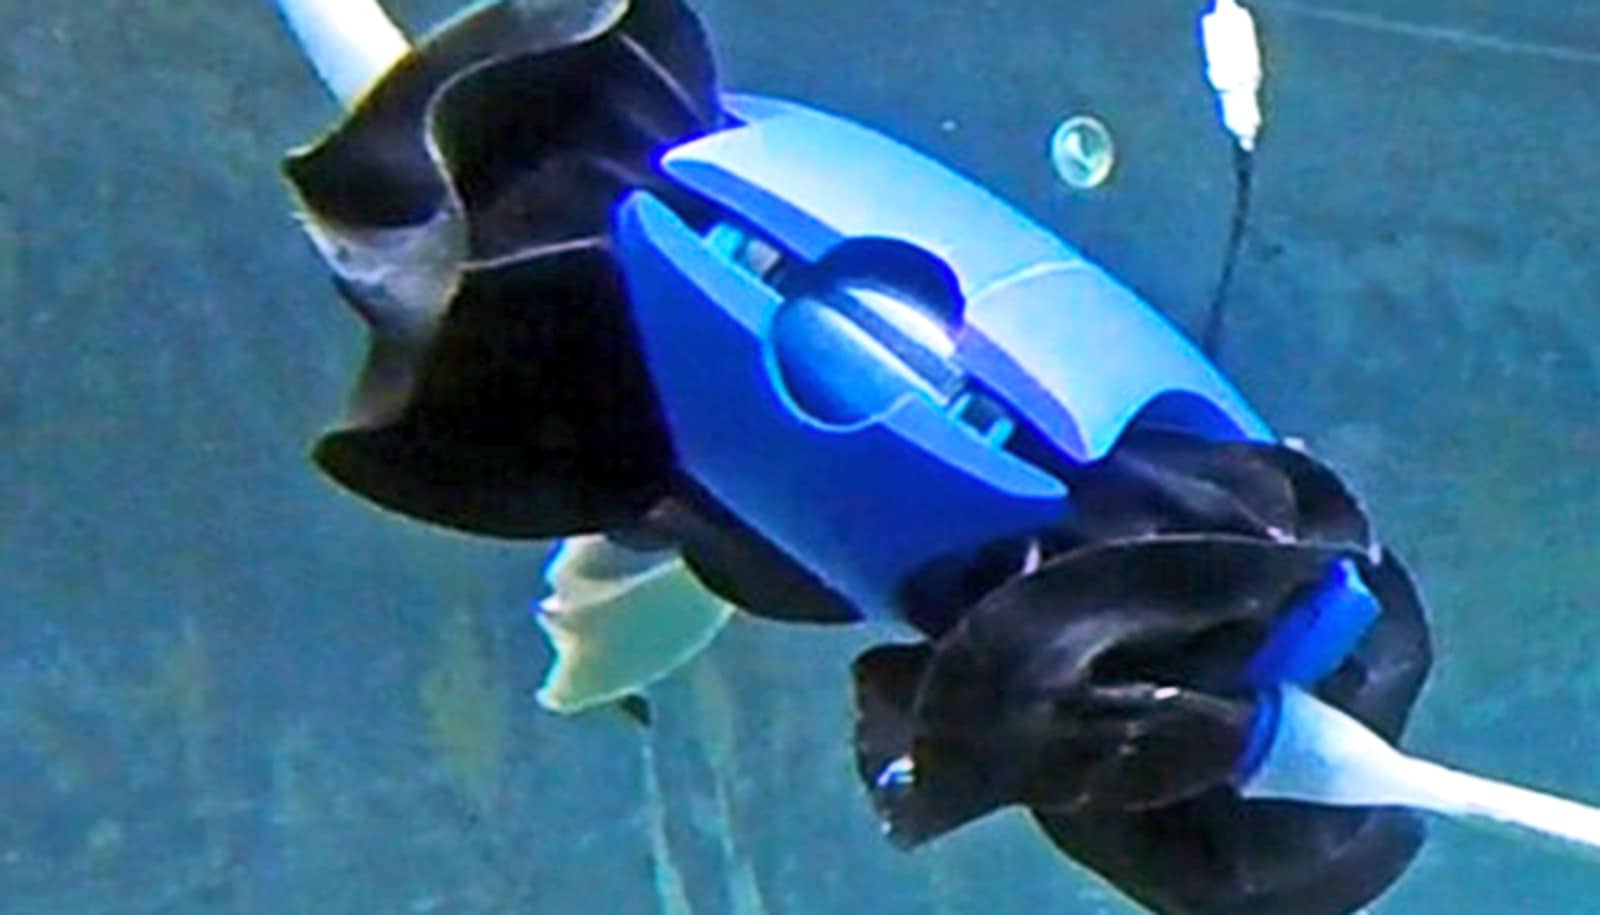 The blue turtle robot swims underwater with it's legs now acting as fins.